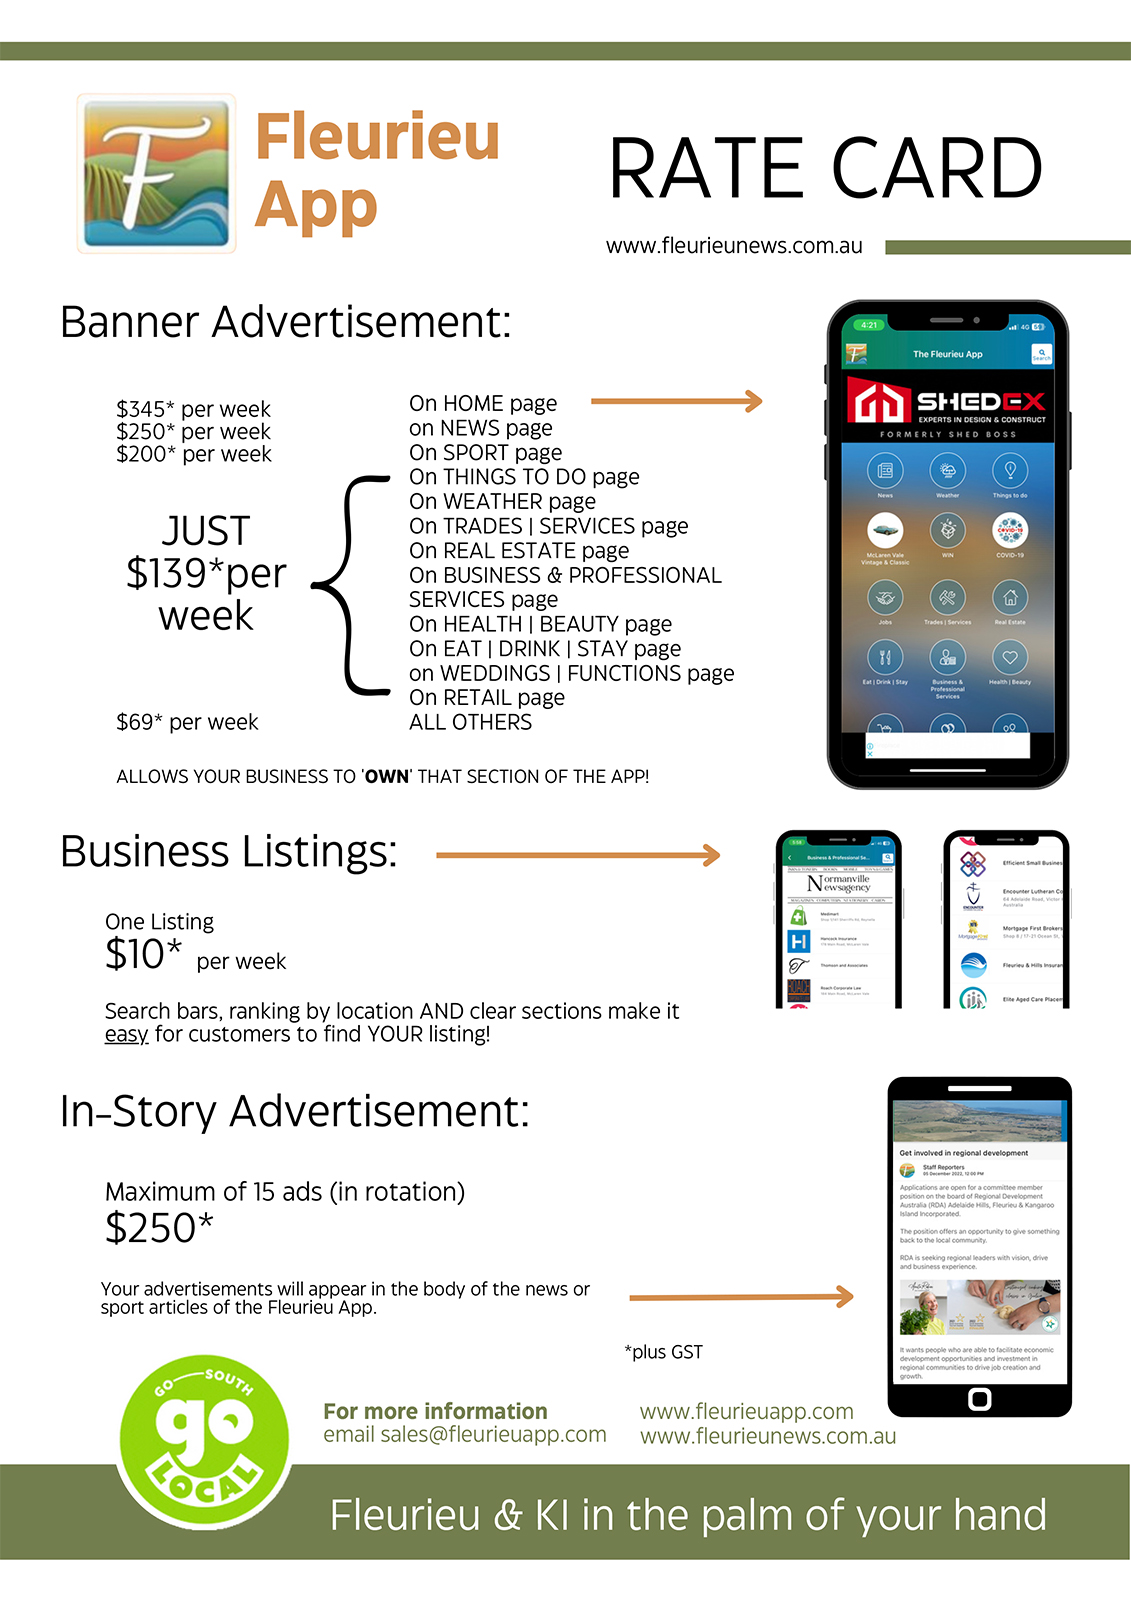 Advertise with the Fleurieu App